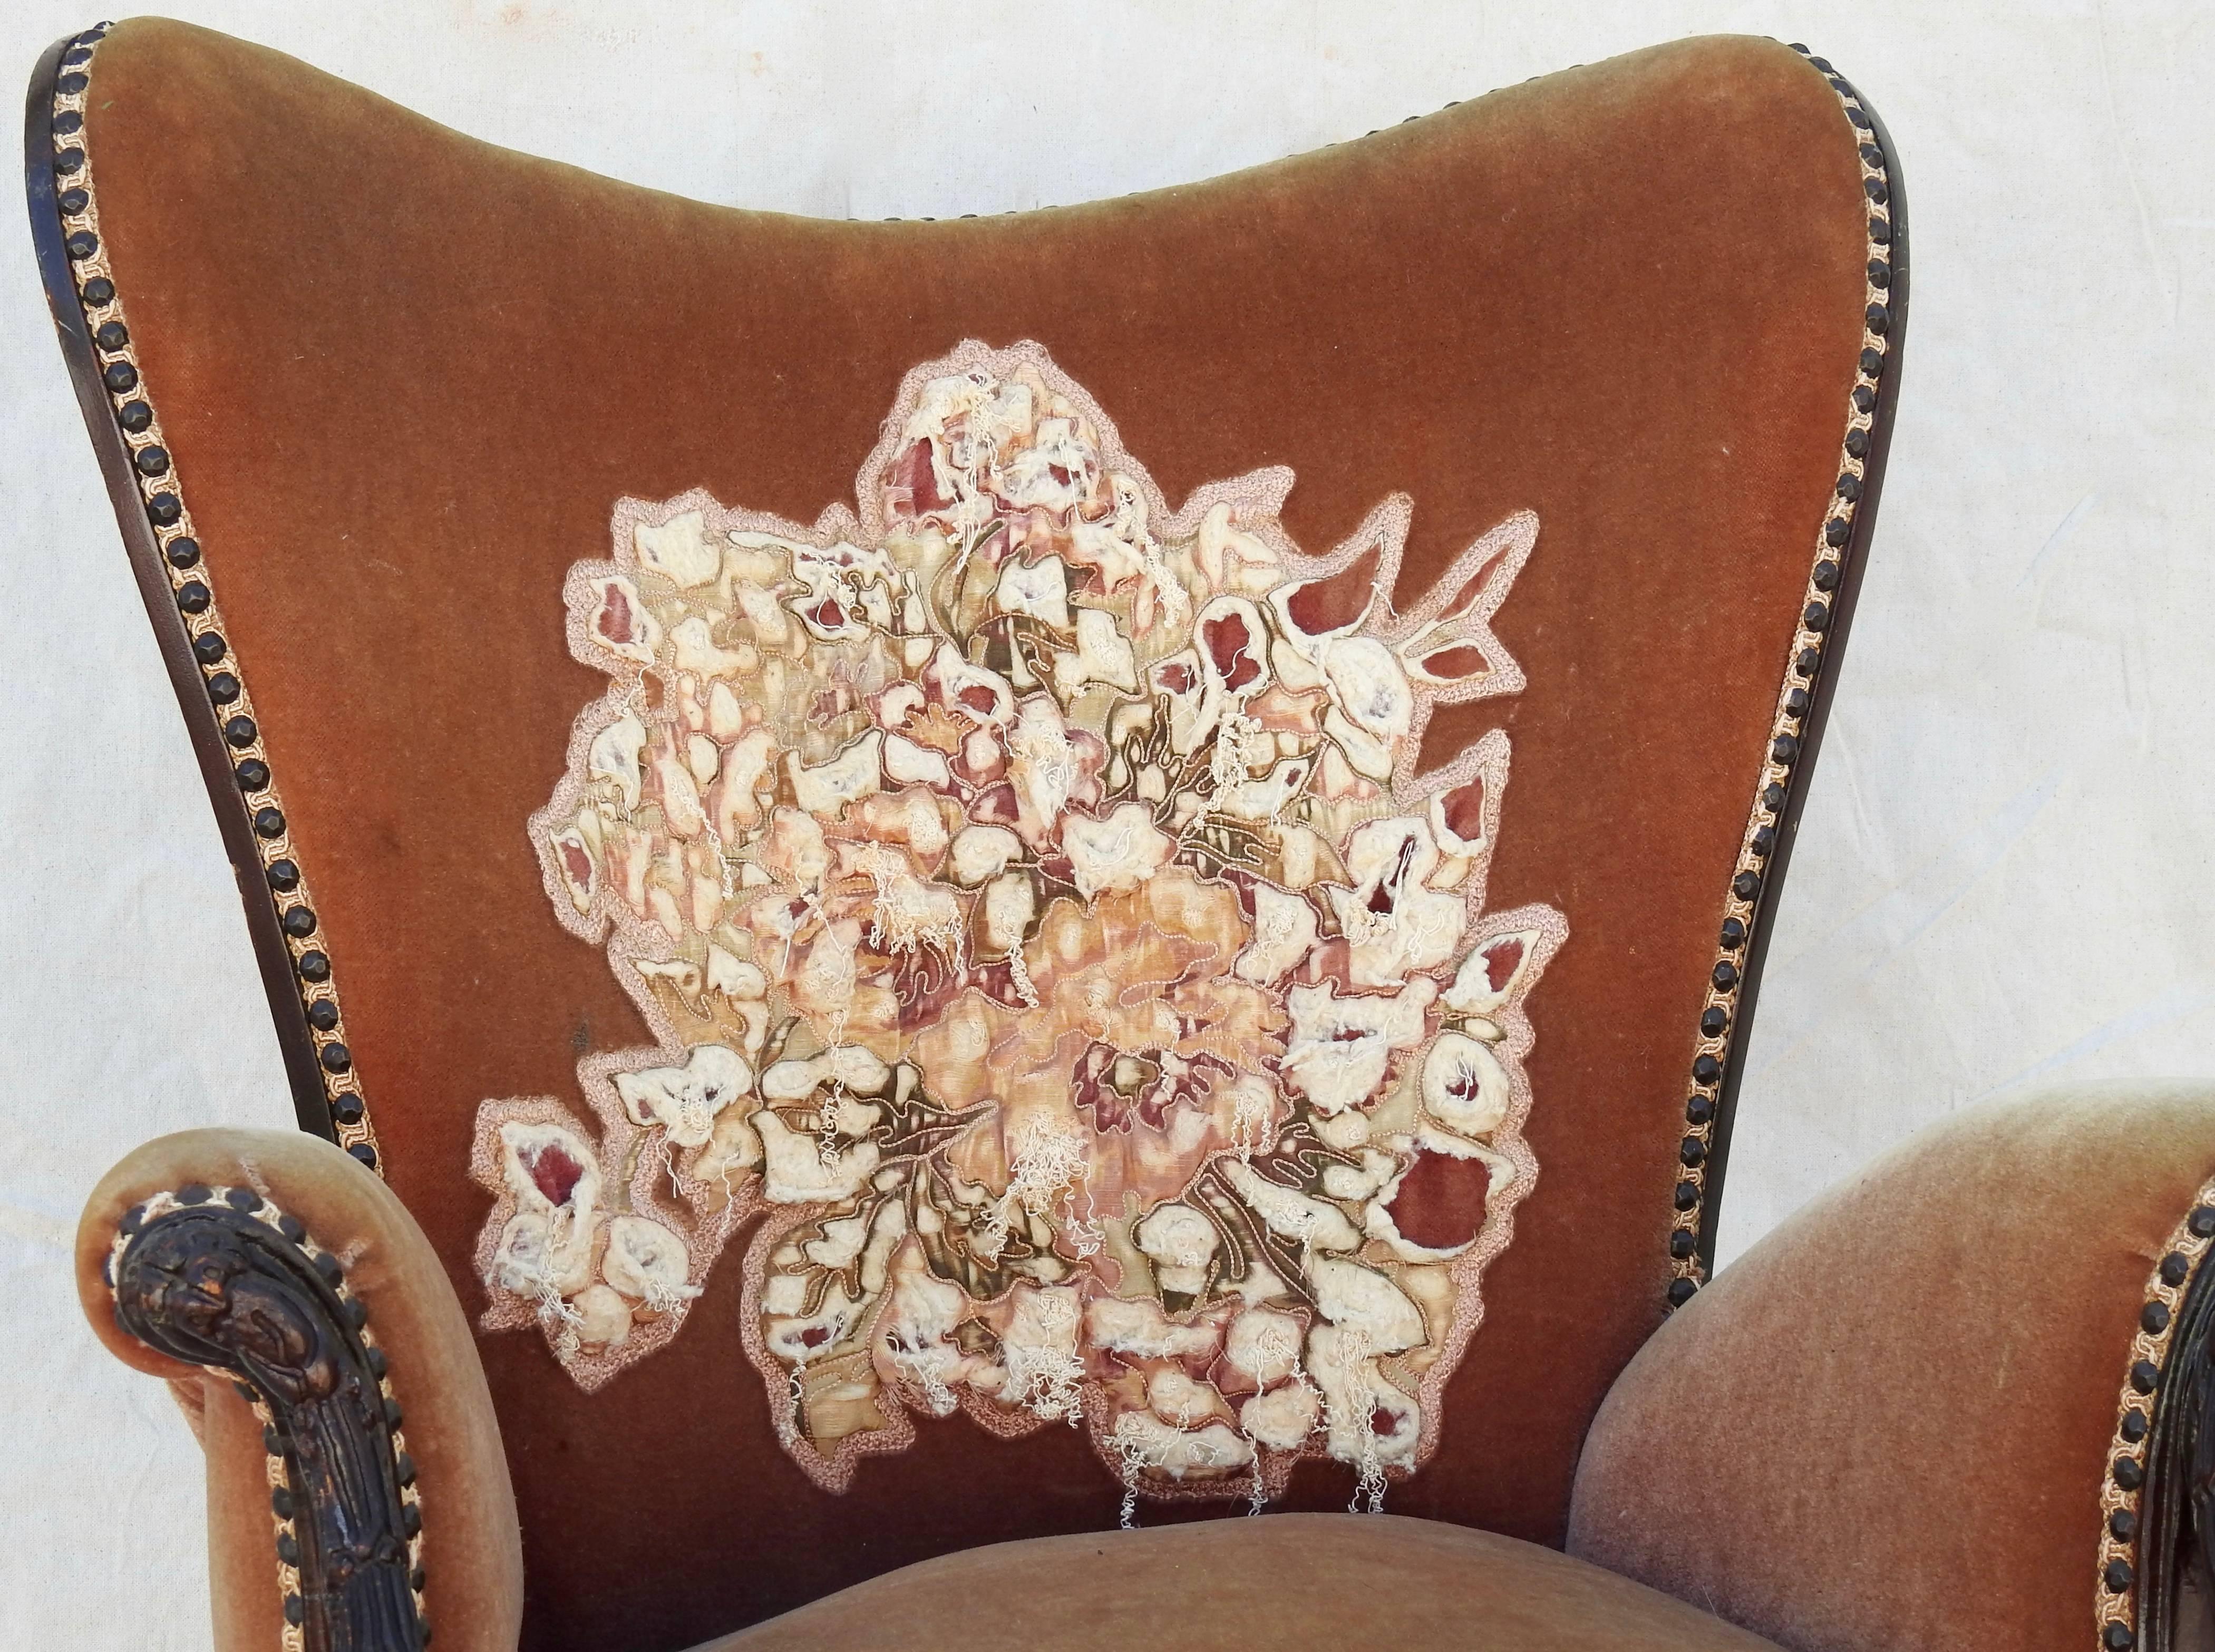 The wood carving on this wingback chair is stunning! The chair is upholstered in soft velvet and the back has an appliqued floral pattern with plenty of wear. The gimp trim is attached with hammered bronze tacks. The chair is attributed to belonging